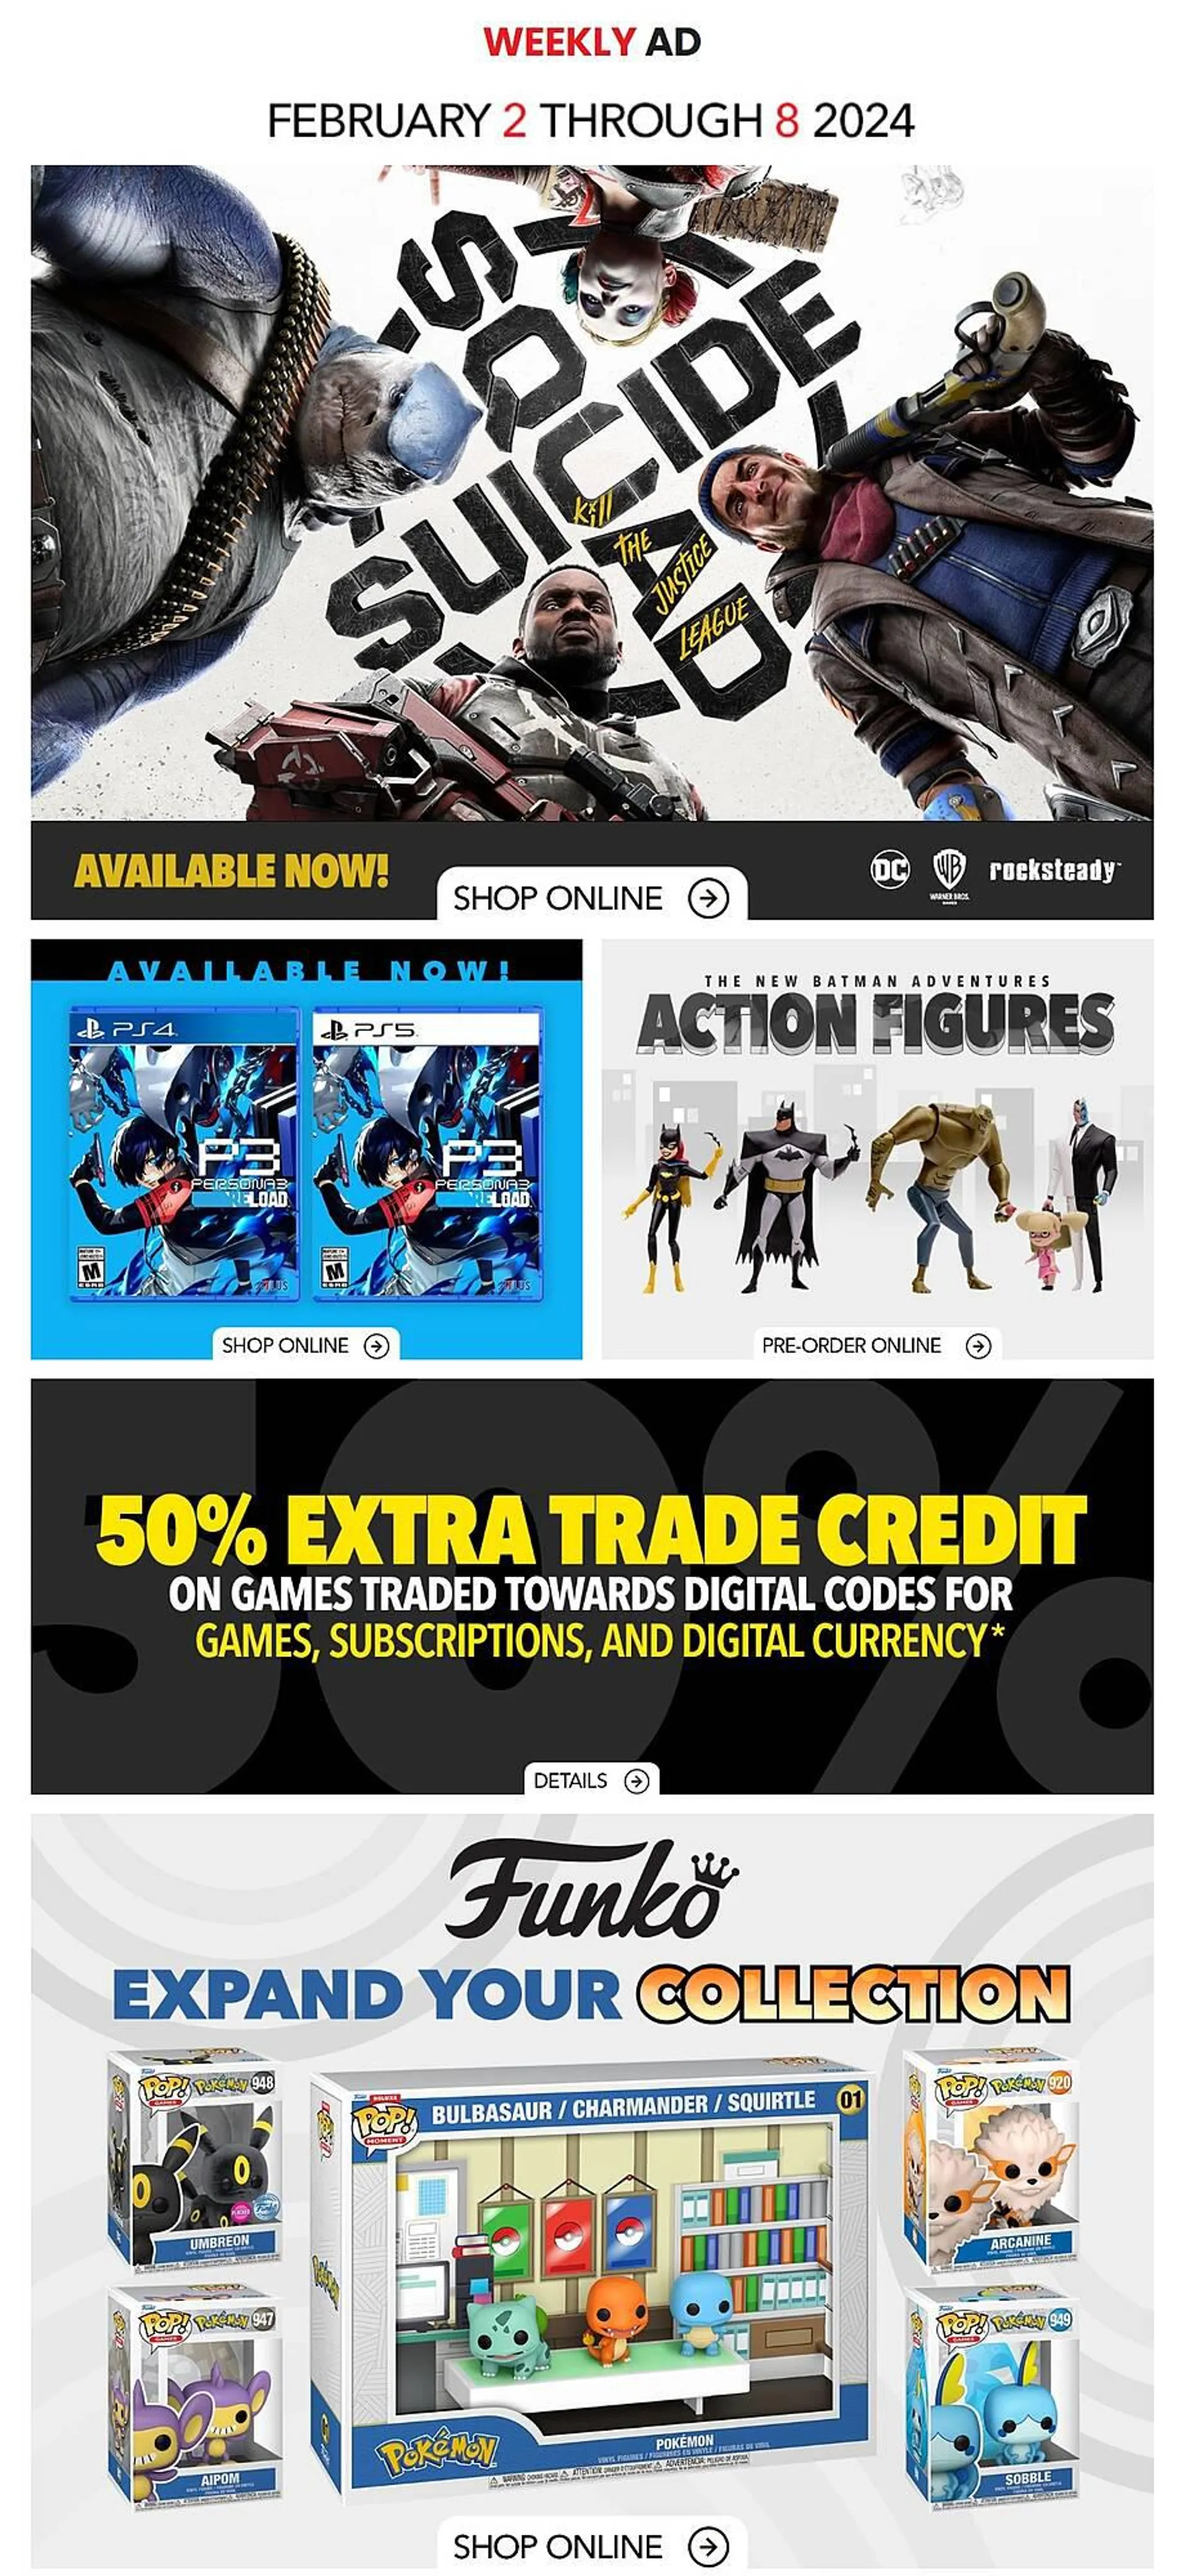 GameStop flyer from February 2 to February 8 2024 - flyer page 1